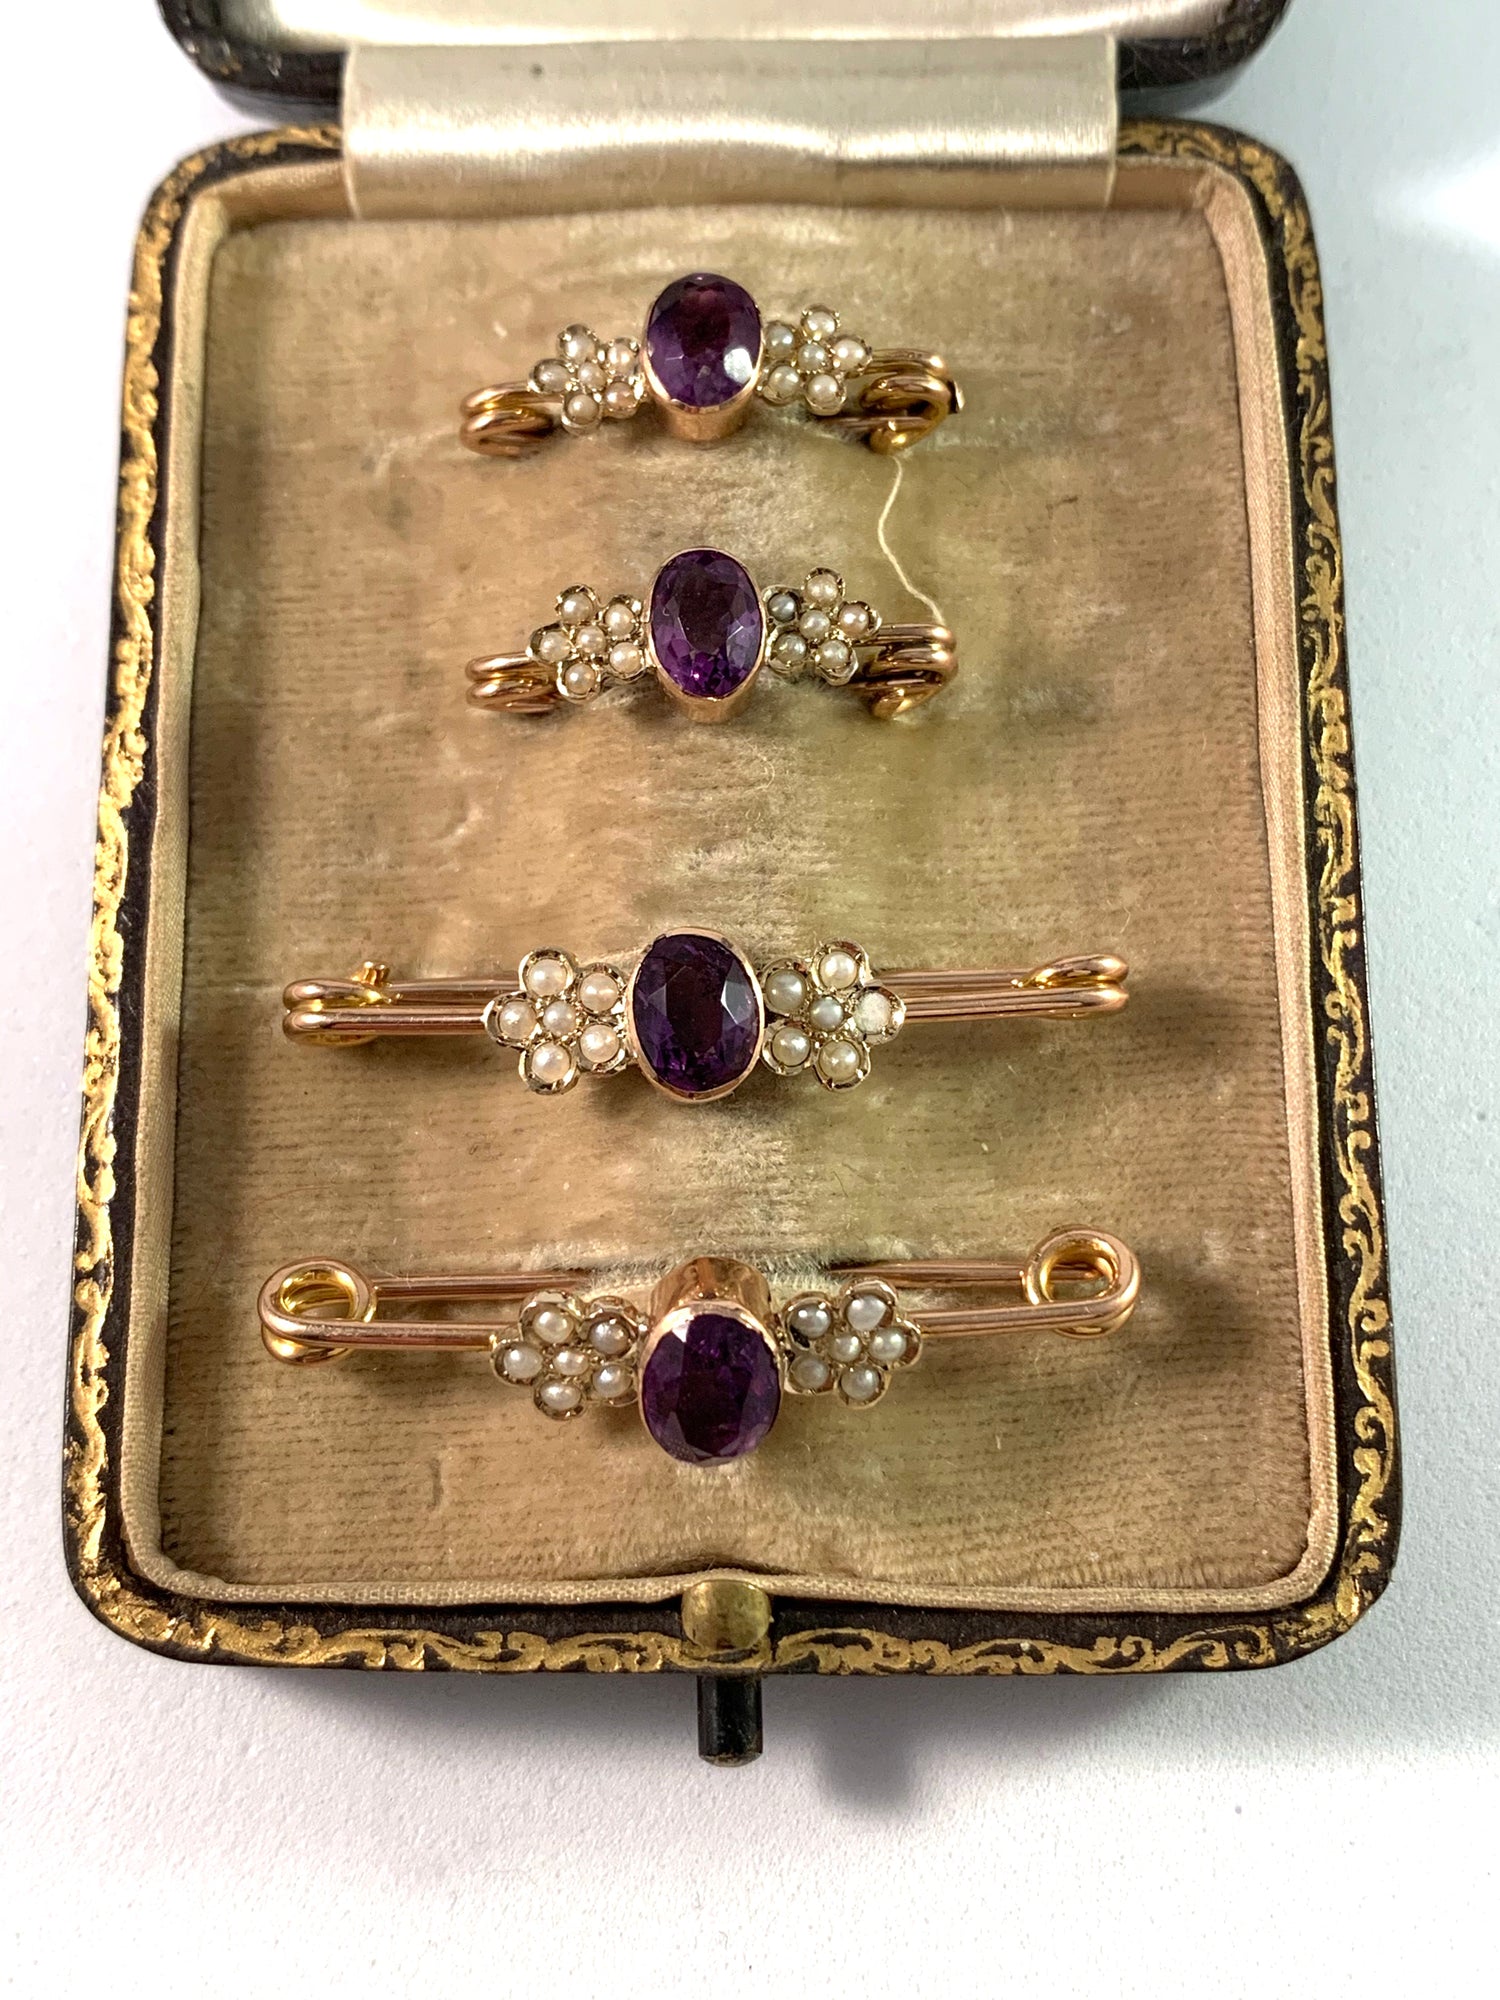 Vintage and antique other jewelry